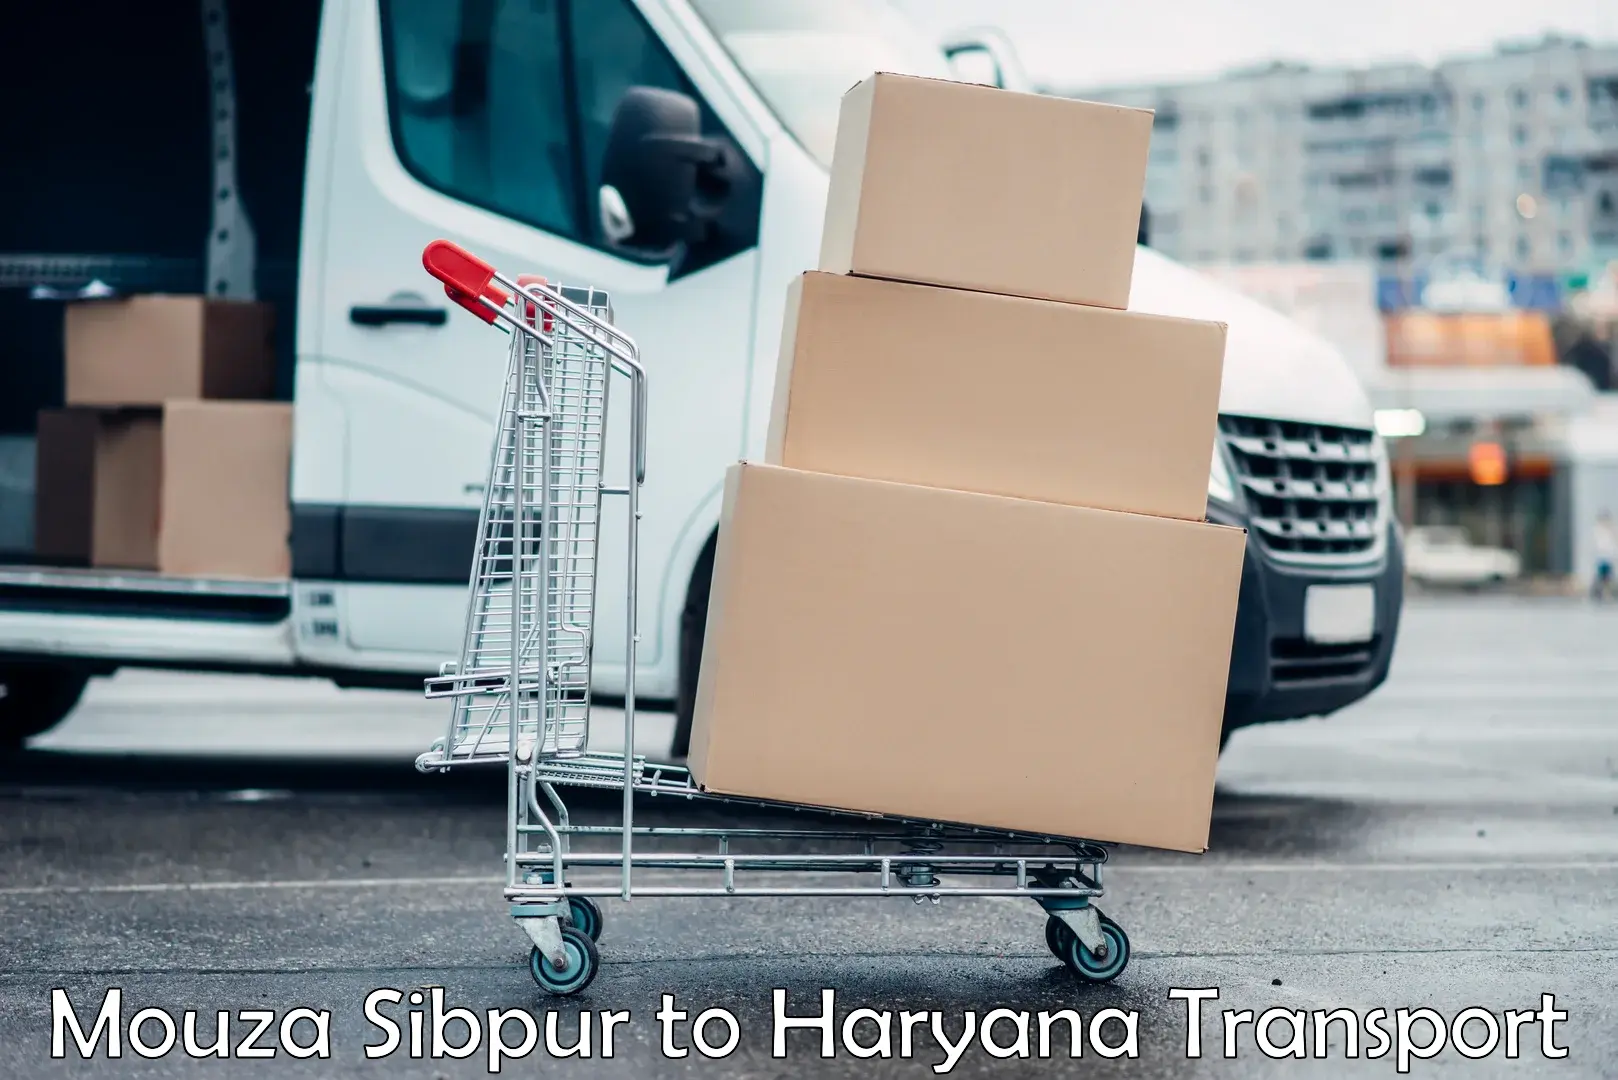 Package delivery services Mouza Sibpur to Bahadurgarh